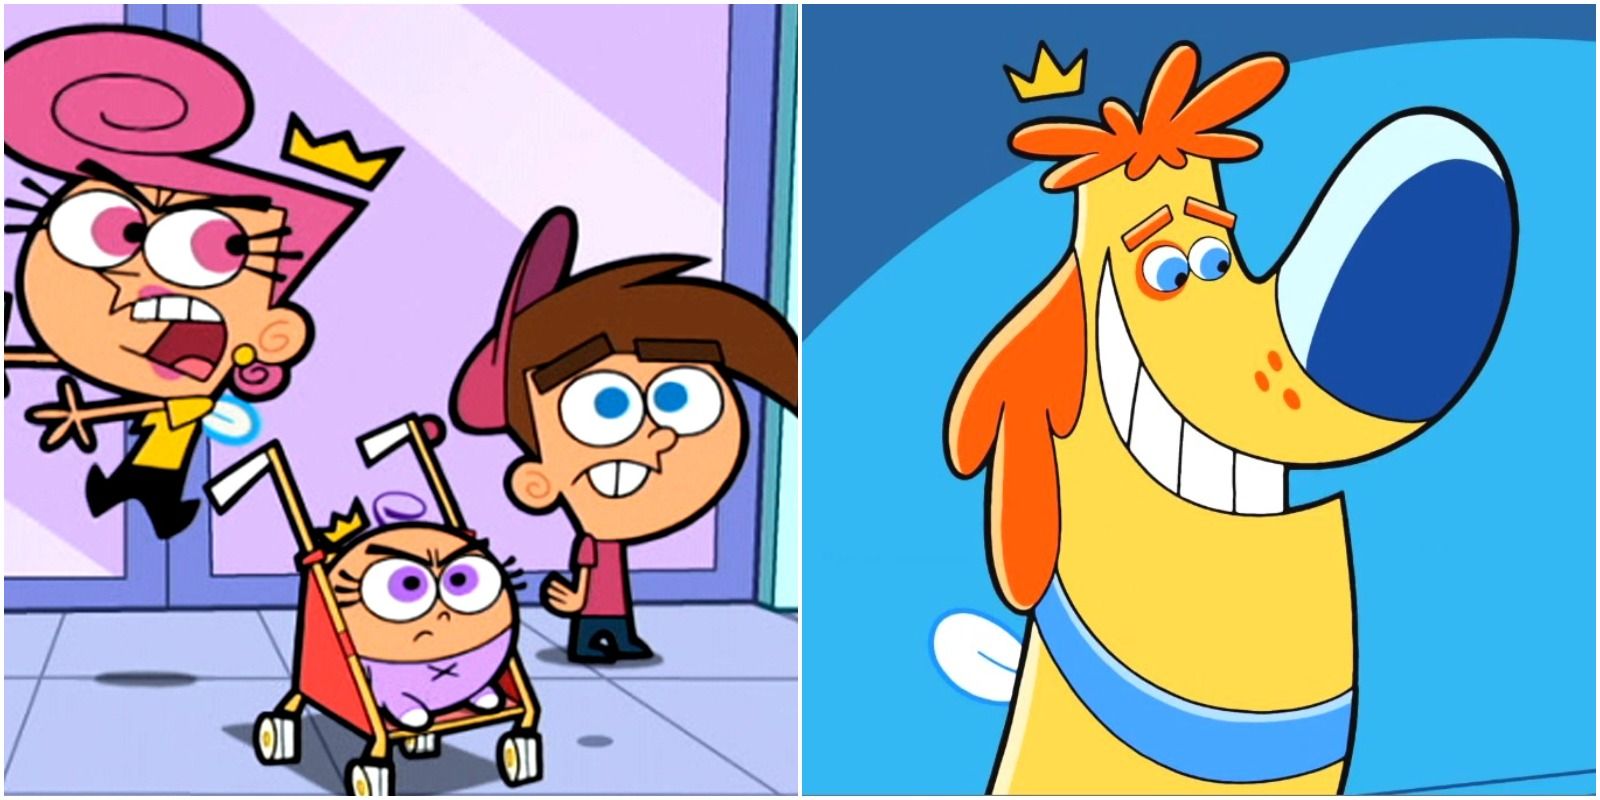 Poof and Sparky, Two Controversial Characters Introduced in the Fairly OddParents later in the show's history